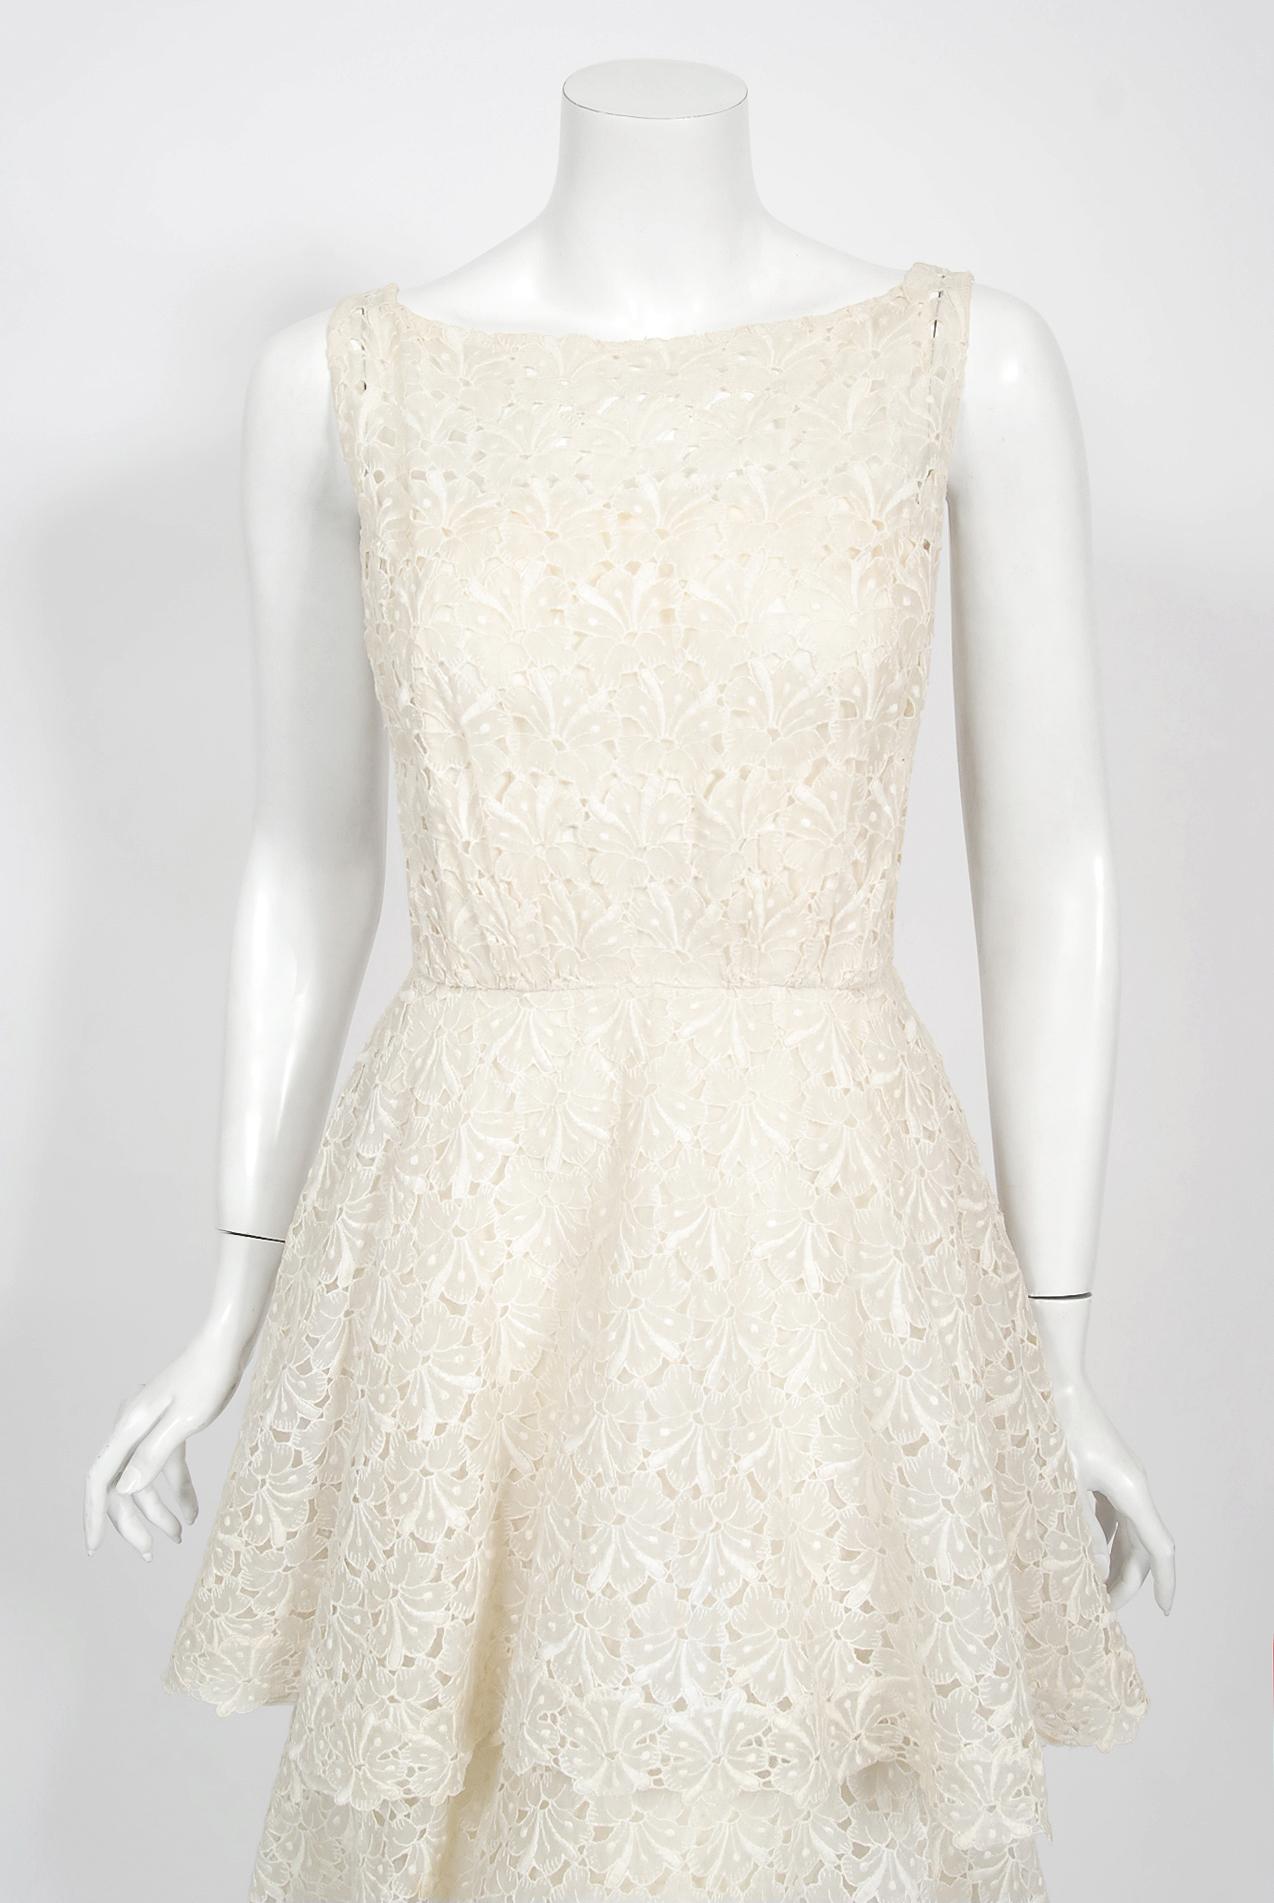 An absolutely stunning Ceil Chapman designer ivory embroidered cotton eyelet dress dating back to the late 1950's. Perfect for any upcoming summer event; you can't help but feel ethereal in this beauty! I love the slight blousy nipped waist bodice